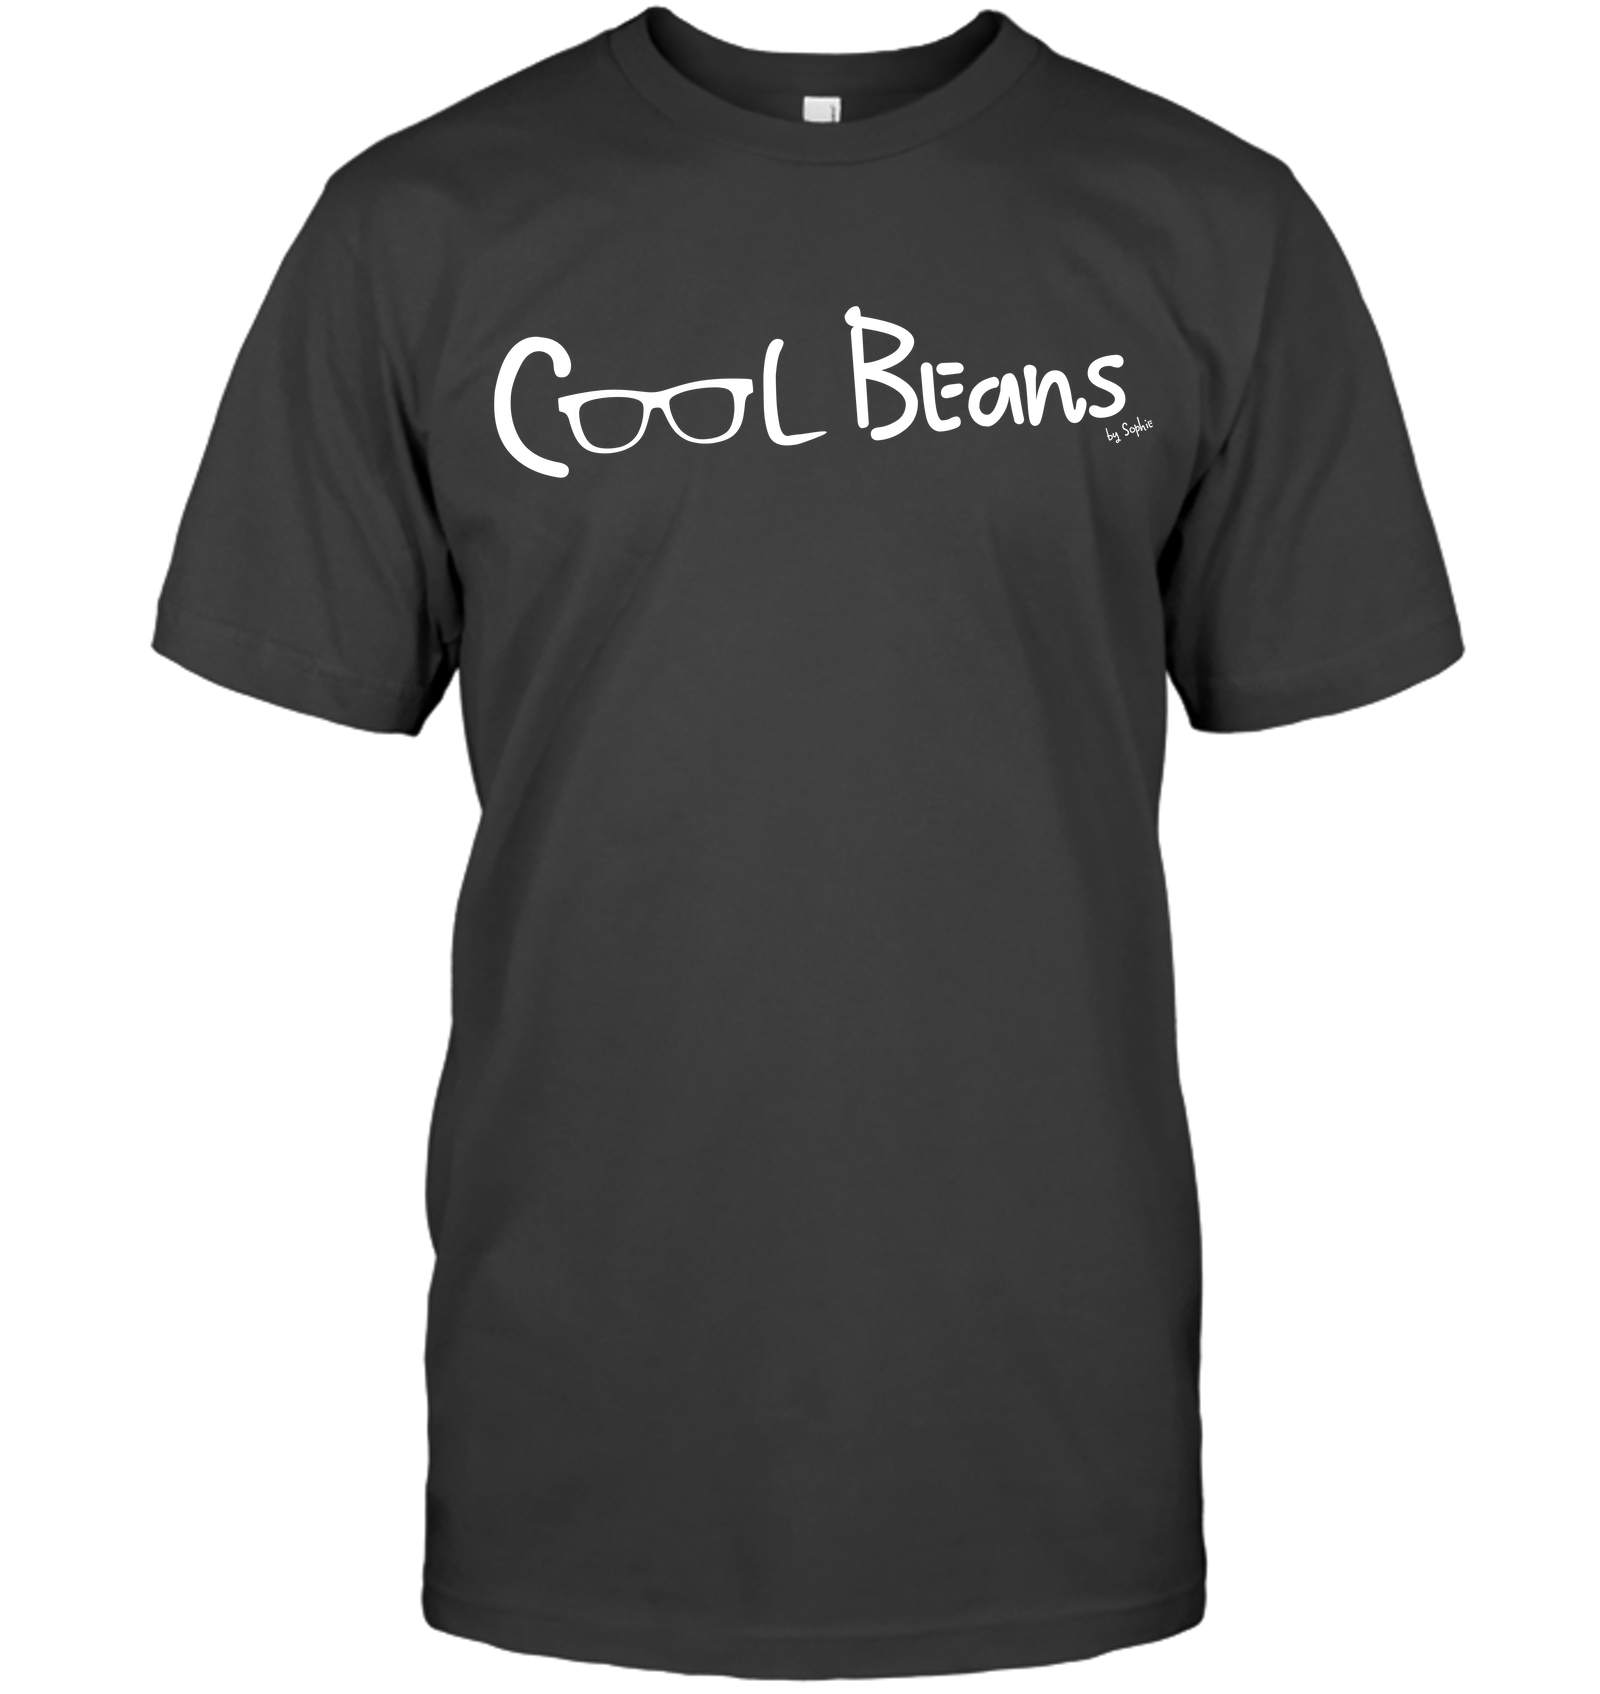 Cool Beans - White (Style 2) - Hanes Adult Tagless® T-Shirt